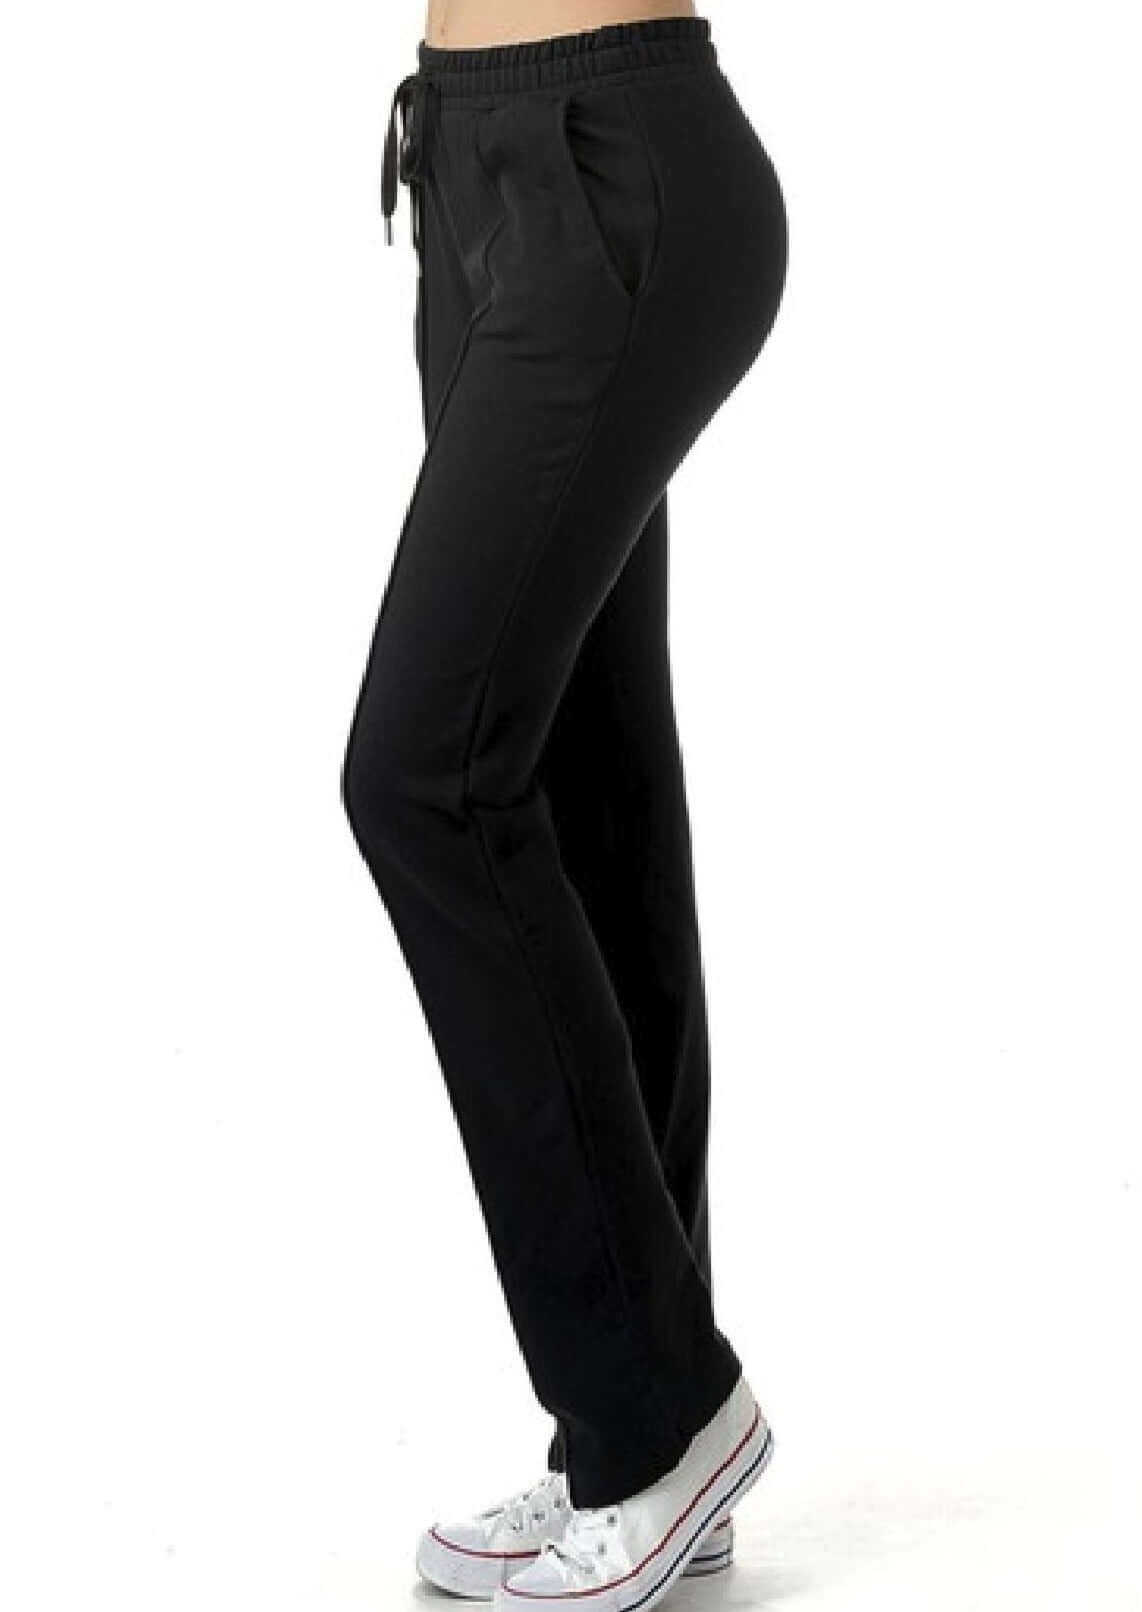 USA Made Ladies Thermal High Quality Black Heavyweight Pants with Elastic & Drawstring Waist | Classy Cozy Cool Women's Made in America Clothing Boutique